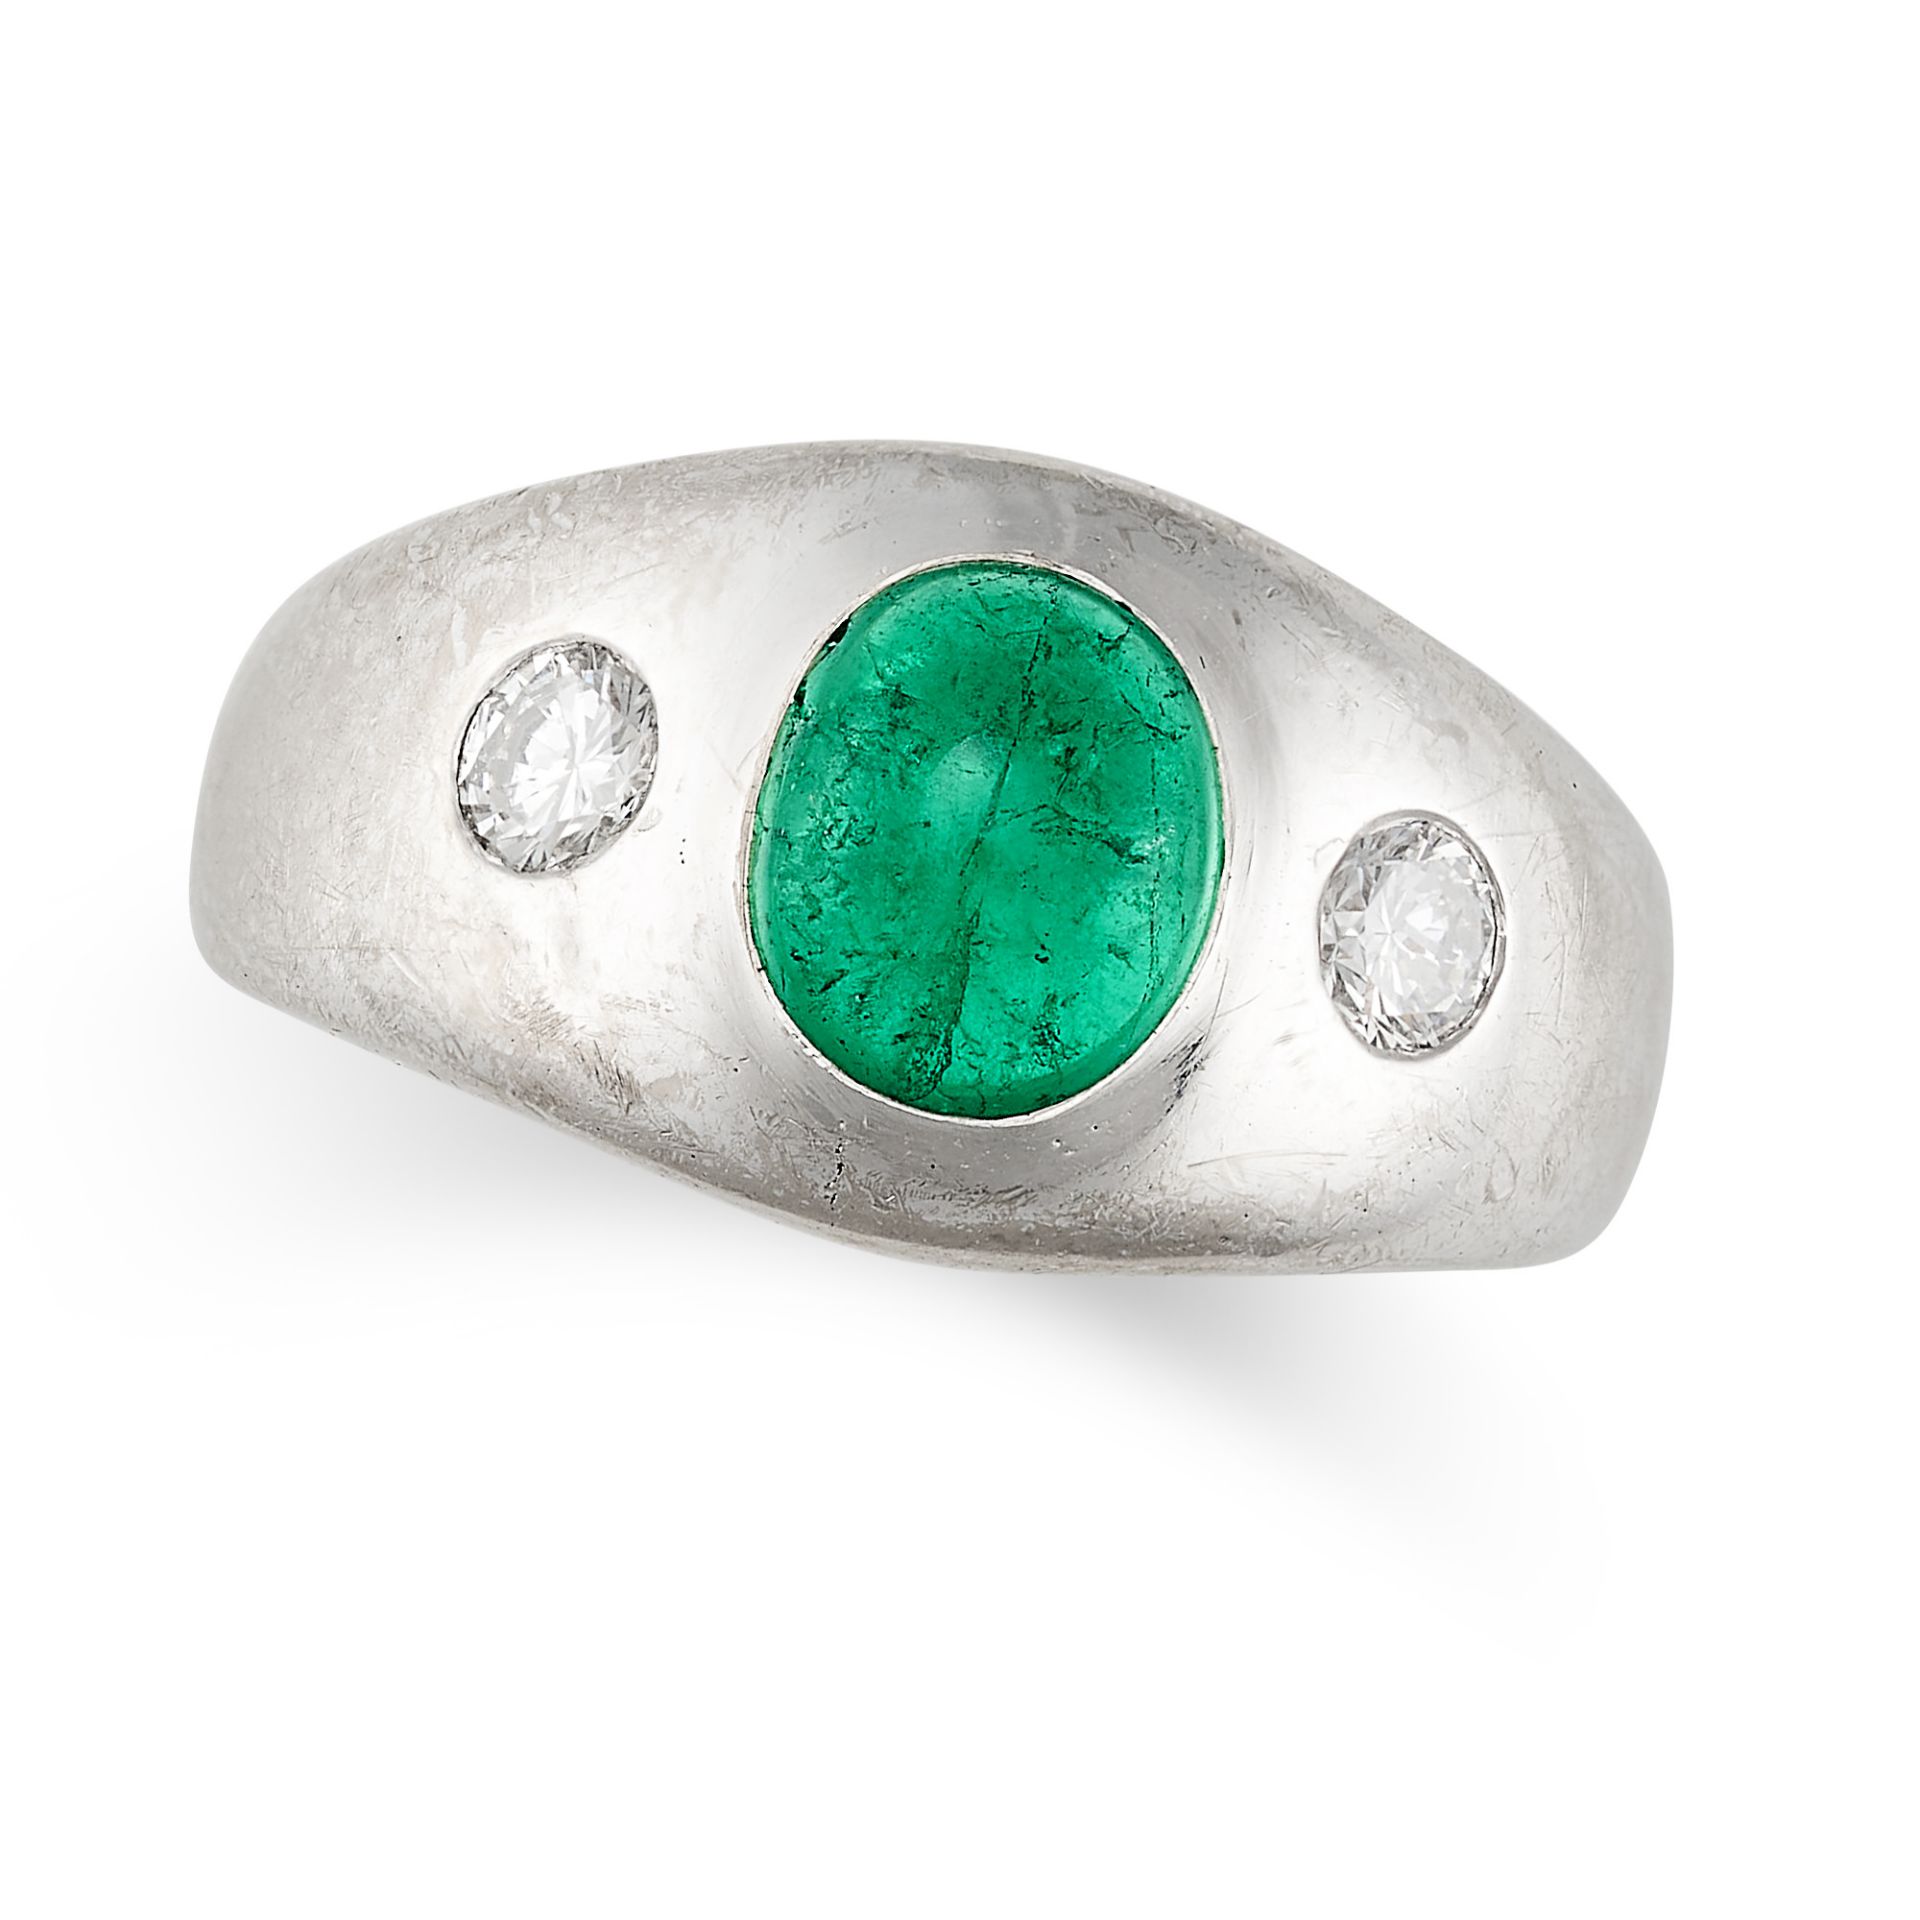 AN EMERALD AND DIAMOND GYPSY RING in 18ct white gold, set with an oval cabochon emerald accented ...